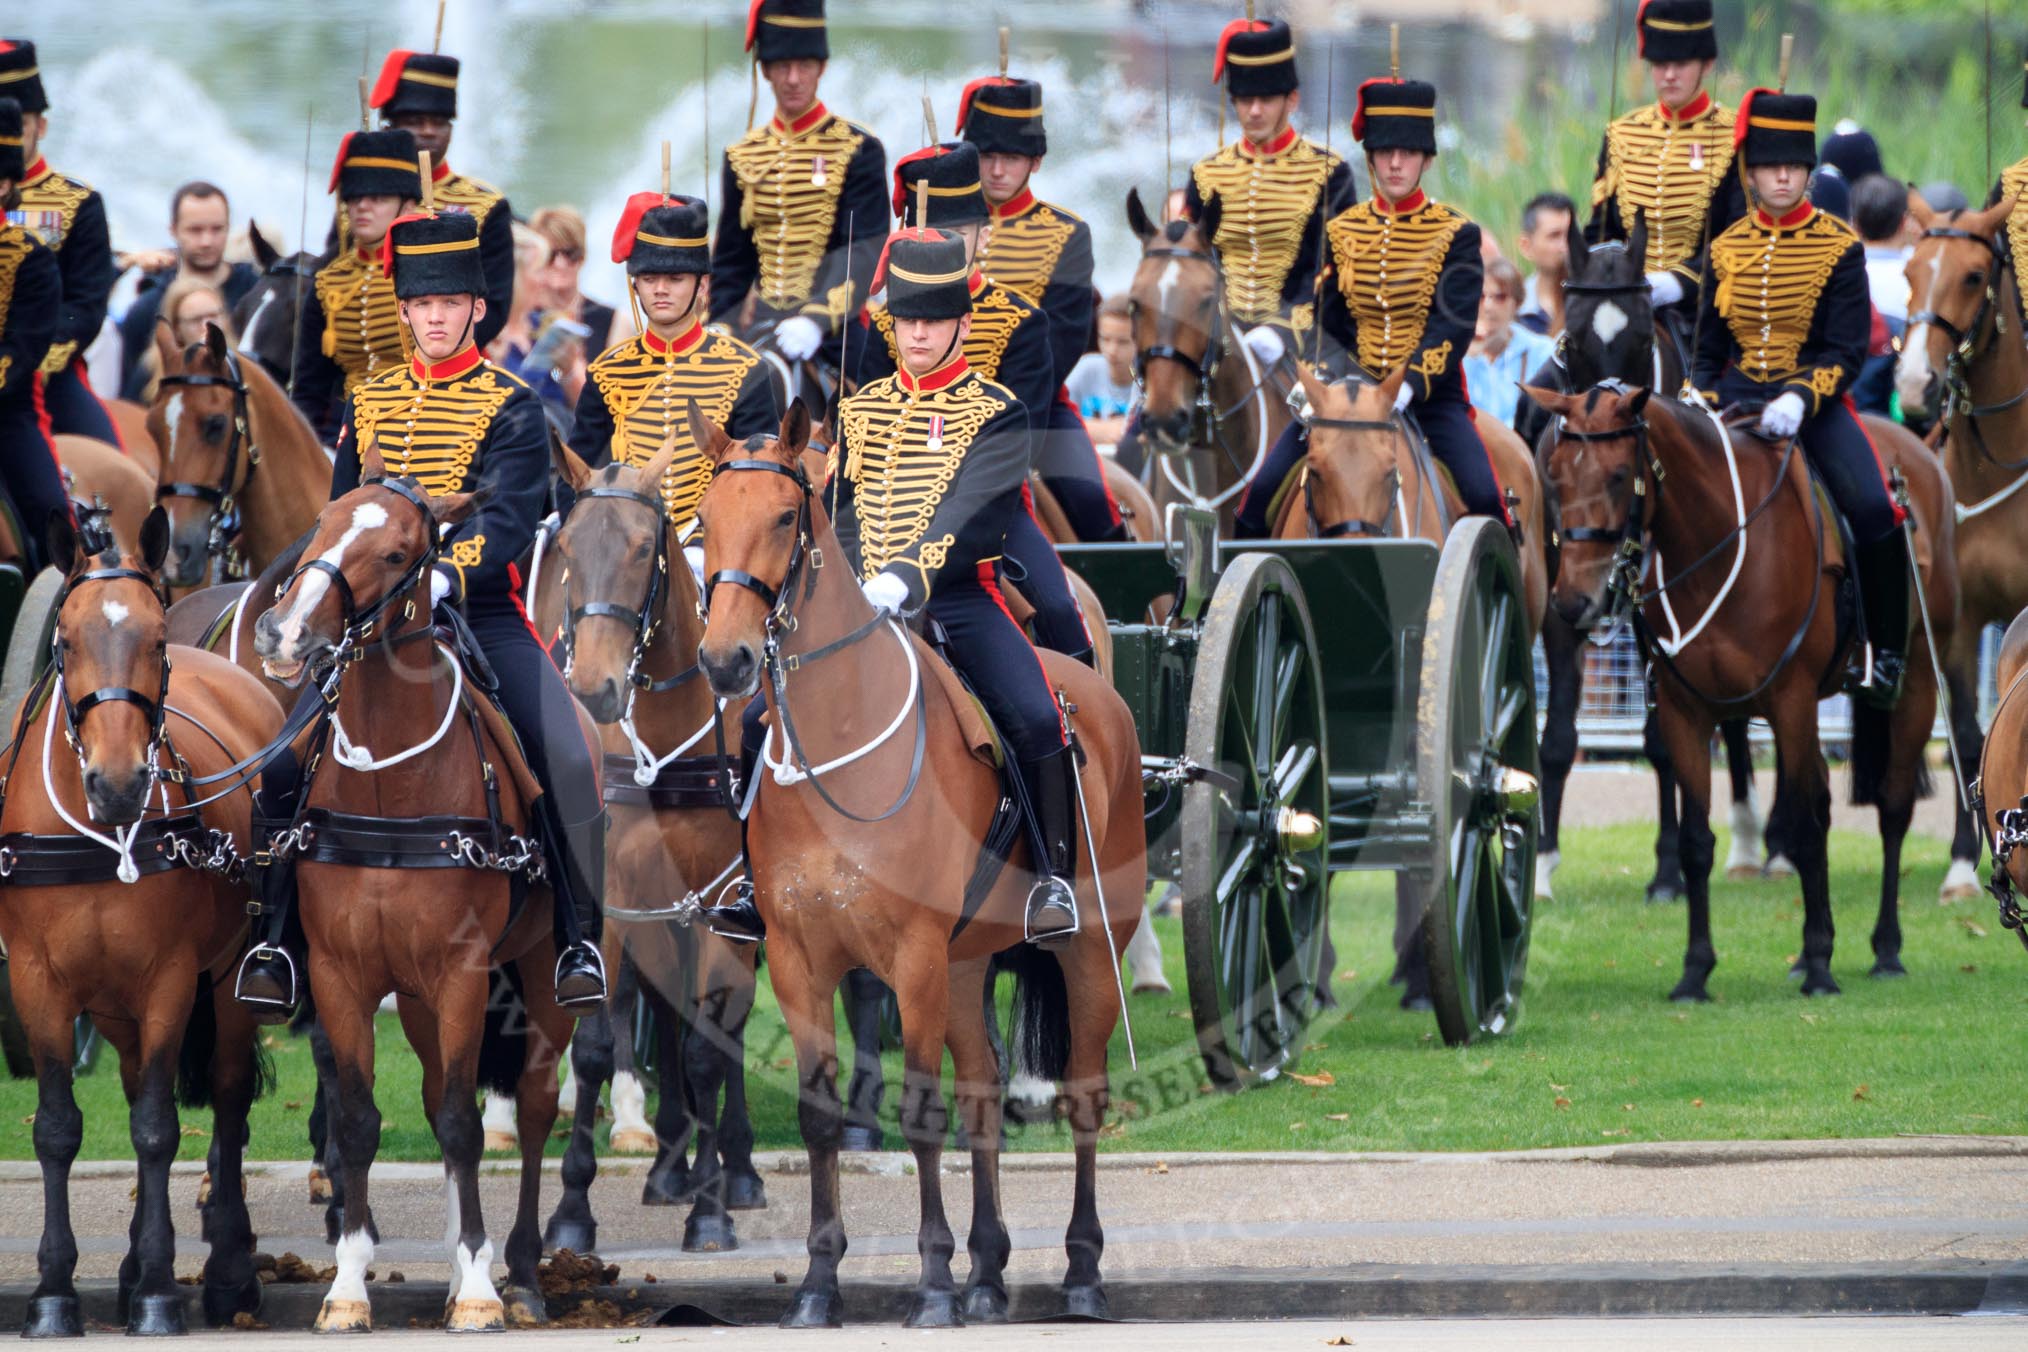 during The Colonel's Review {iptcyear4} (final rehearsal for Trooping the Colour, The Queen's Birthday Parade)  at Horse Guards Parade, Westminster, London, 2 June 2018, 11:43.